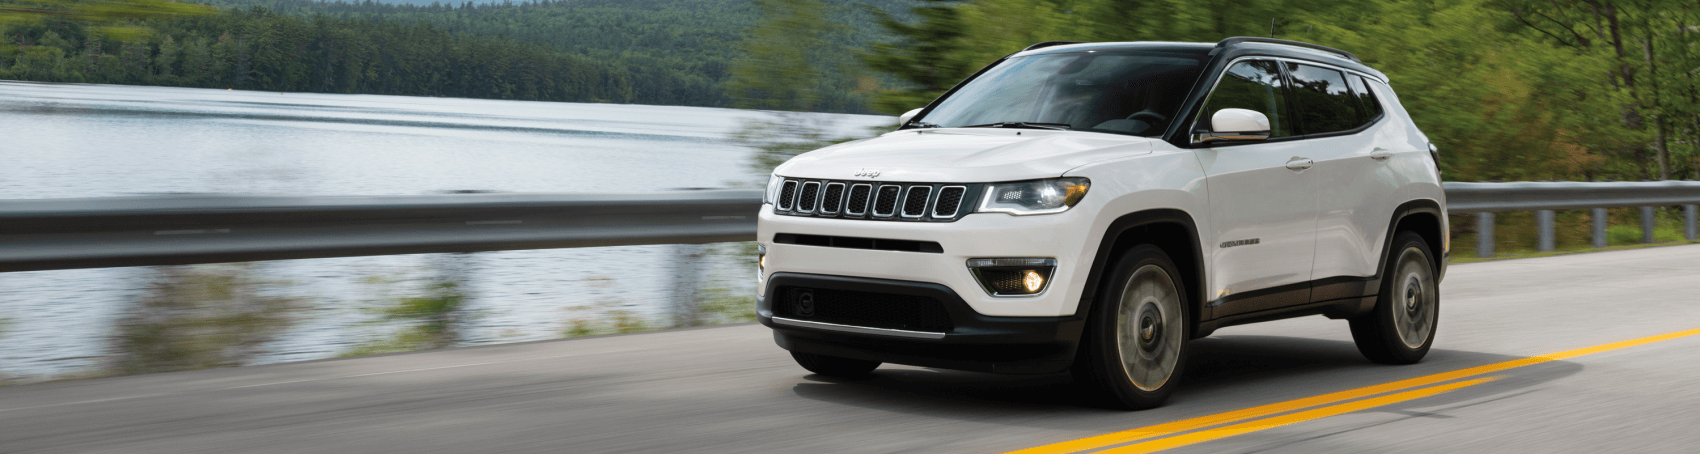 2021 Jeep Compass Limited Pearl White Mountain Road Tunkhannock Auto Mart